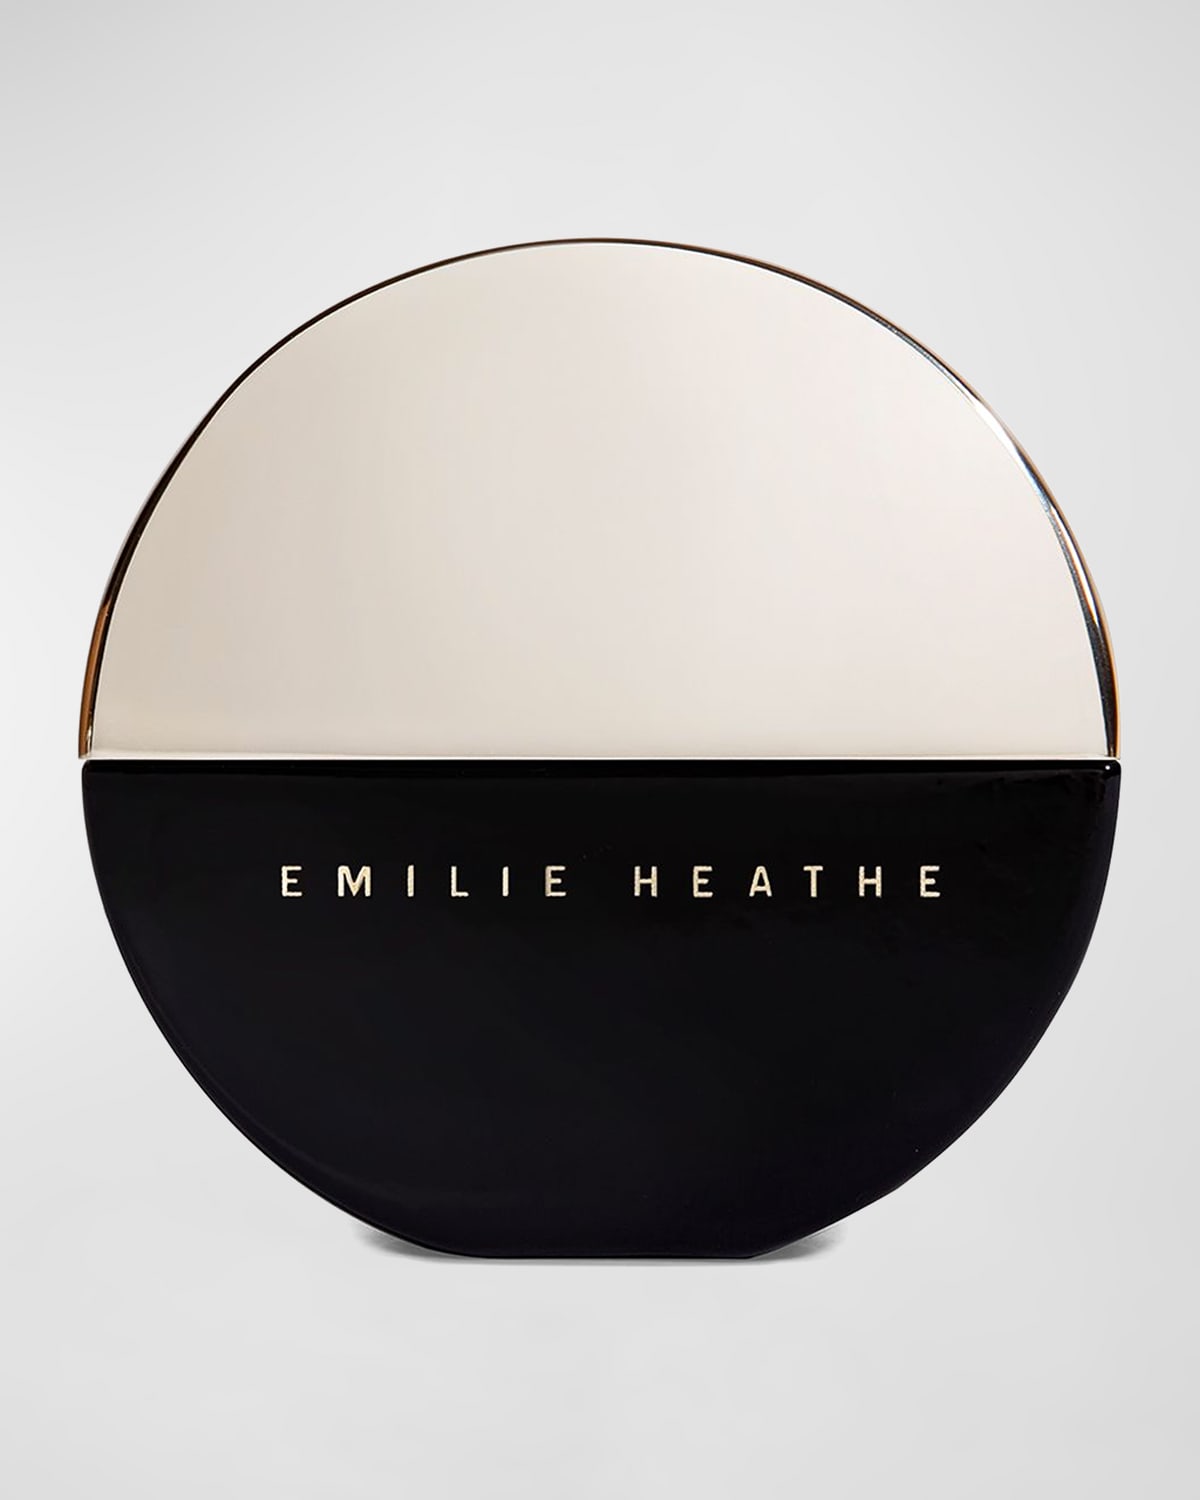 Emilie Heathe On the Top Glossy Top Coat